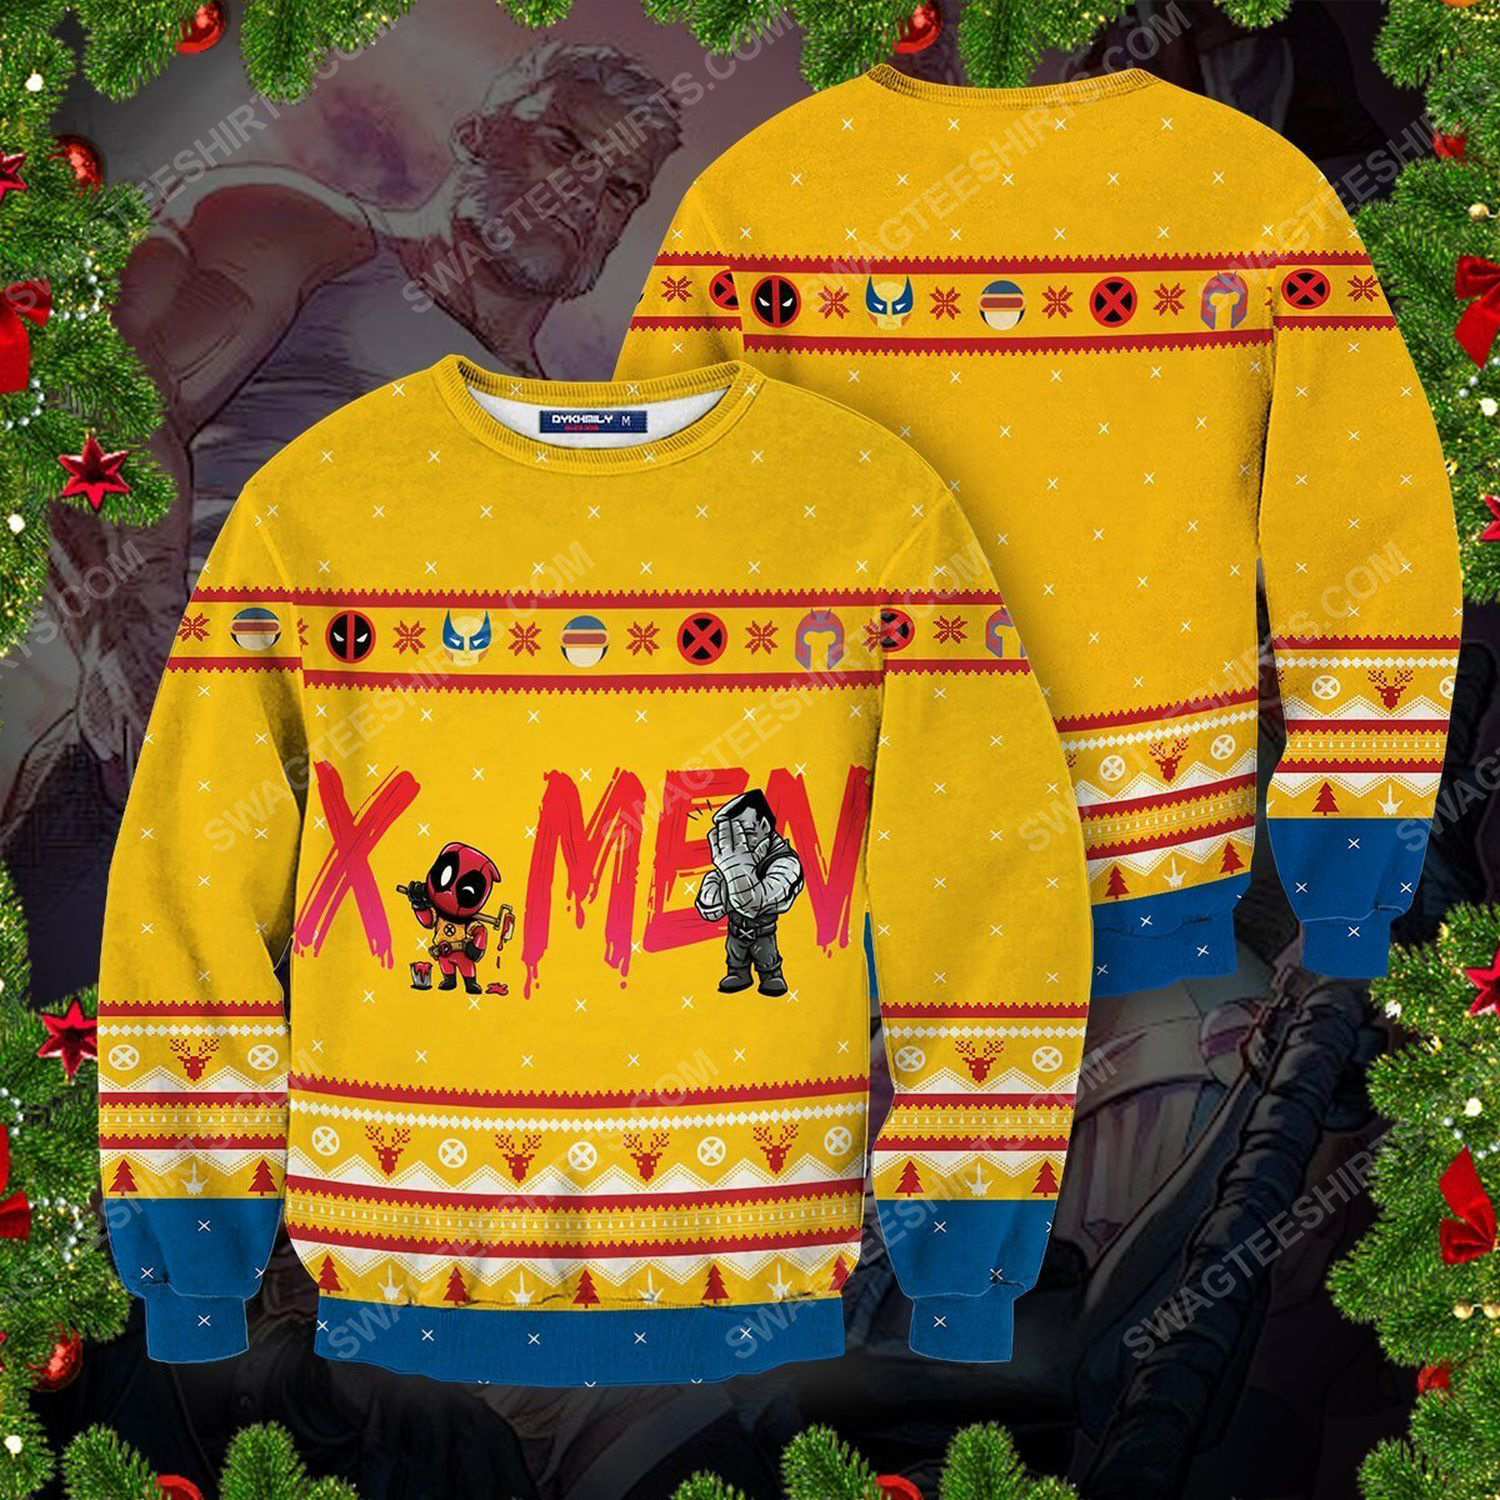 [special edition] Marvel deadpool mutants full print ugly christmas sweater – maria